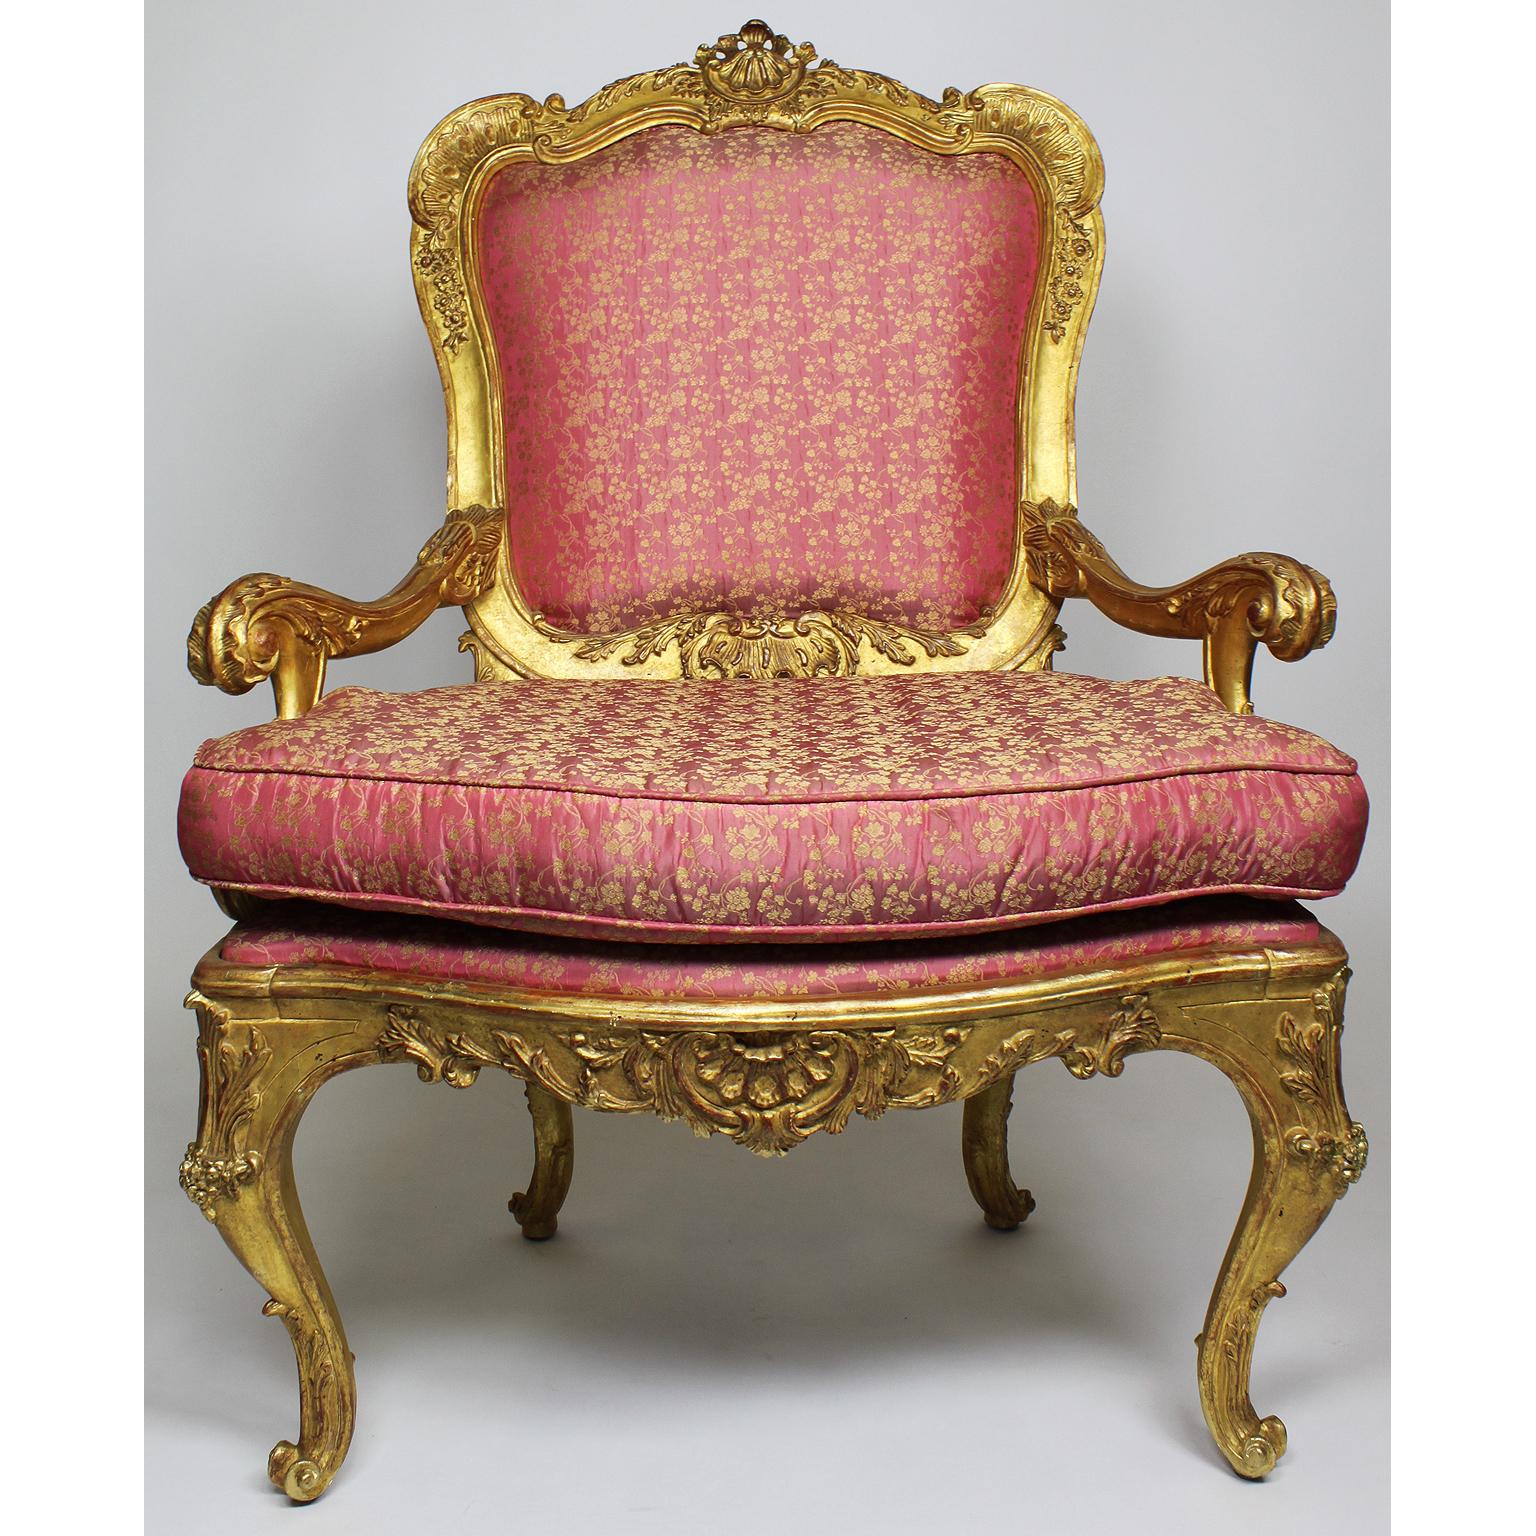 Pair of Italian Venetian Rococo Revival Style Giltwood Carved Throne Armchairs In Good Condition For Sale In Los Angeles, CA